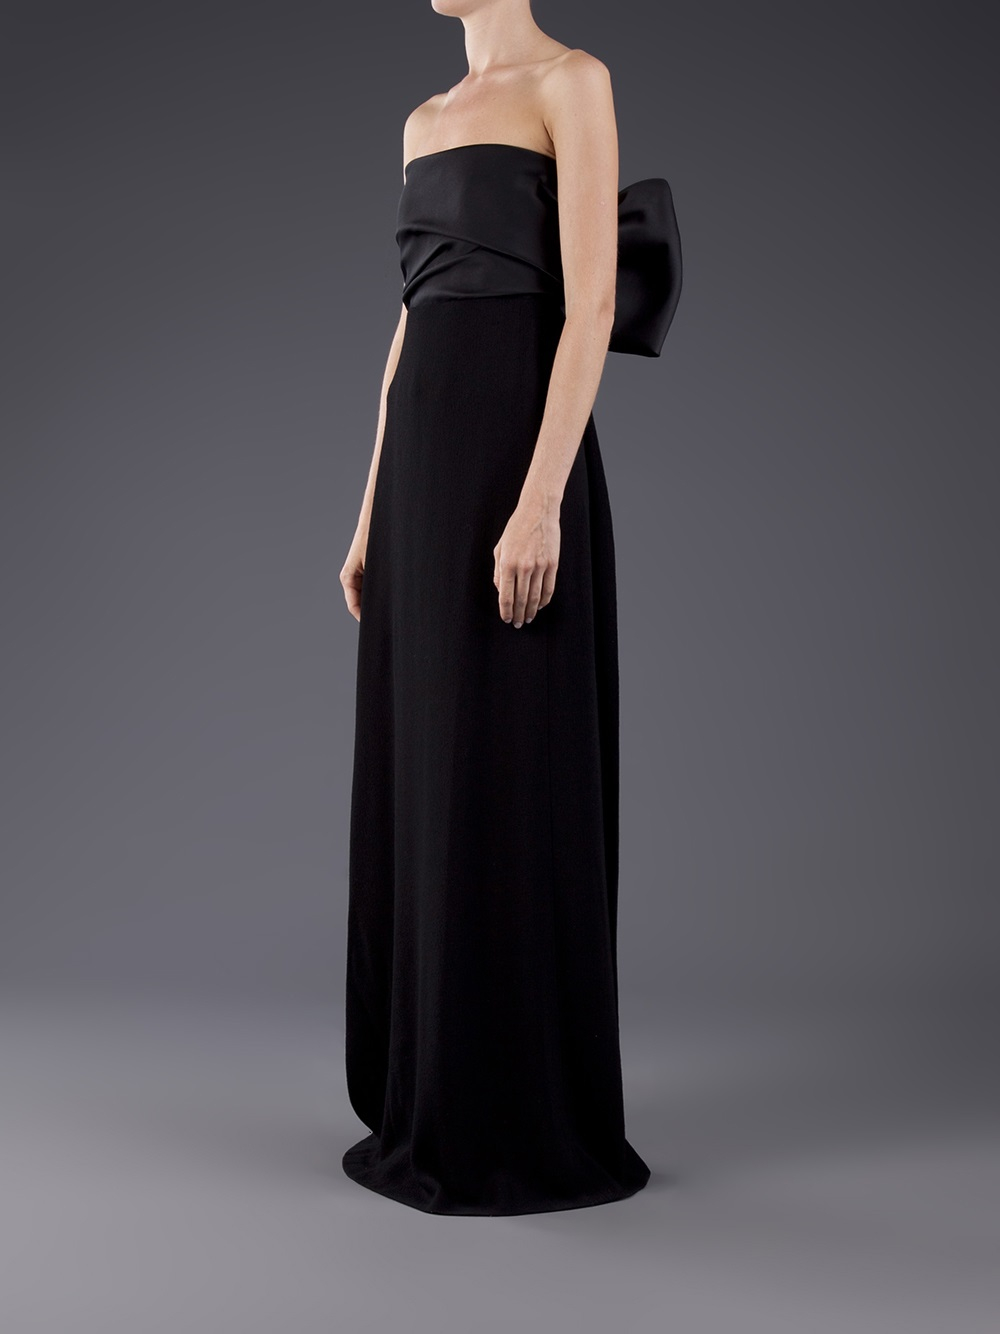 Strapless Black Silk A-Line Wedding Dress with Skirt Split and Bow Detail